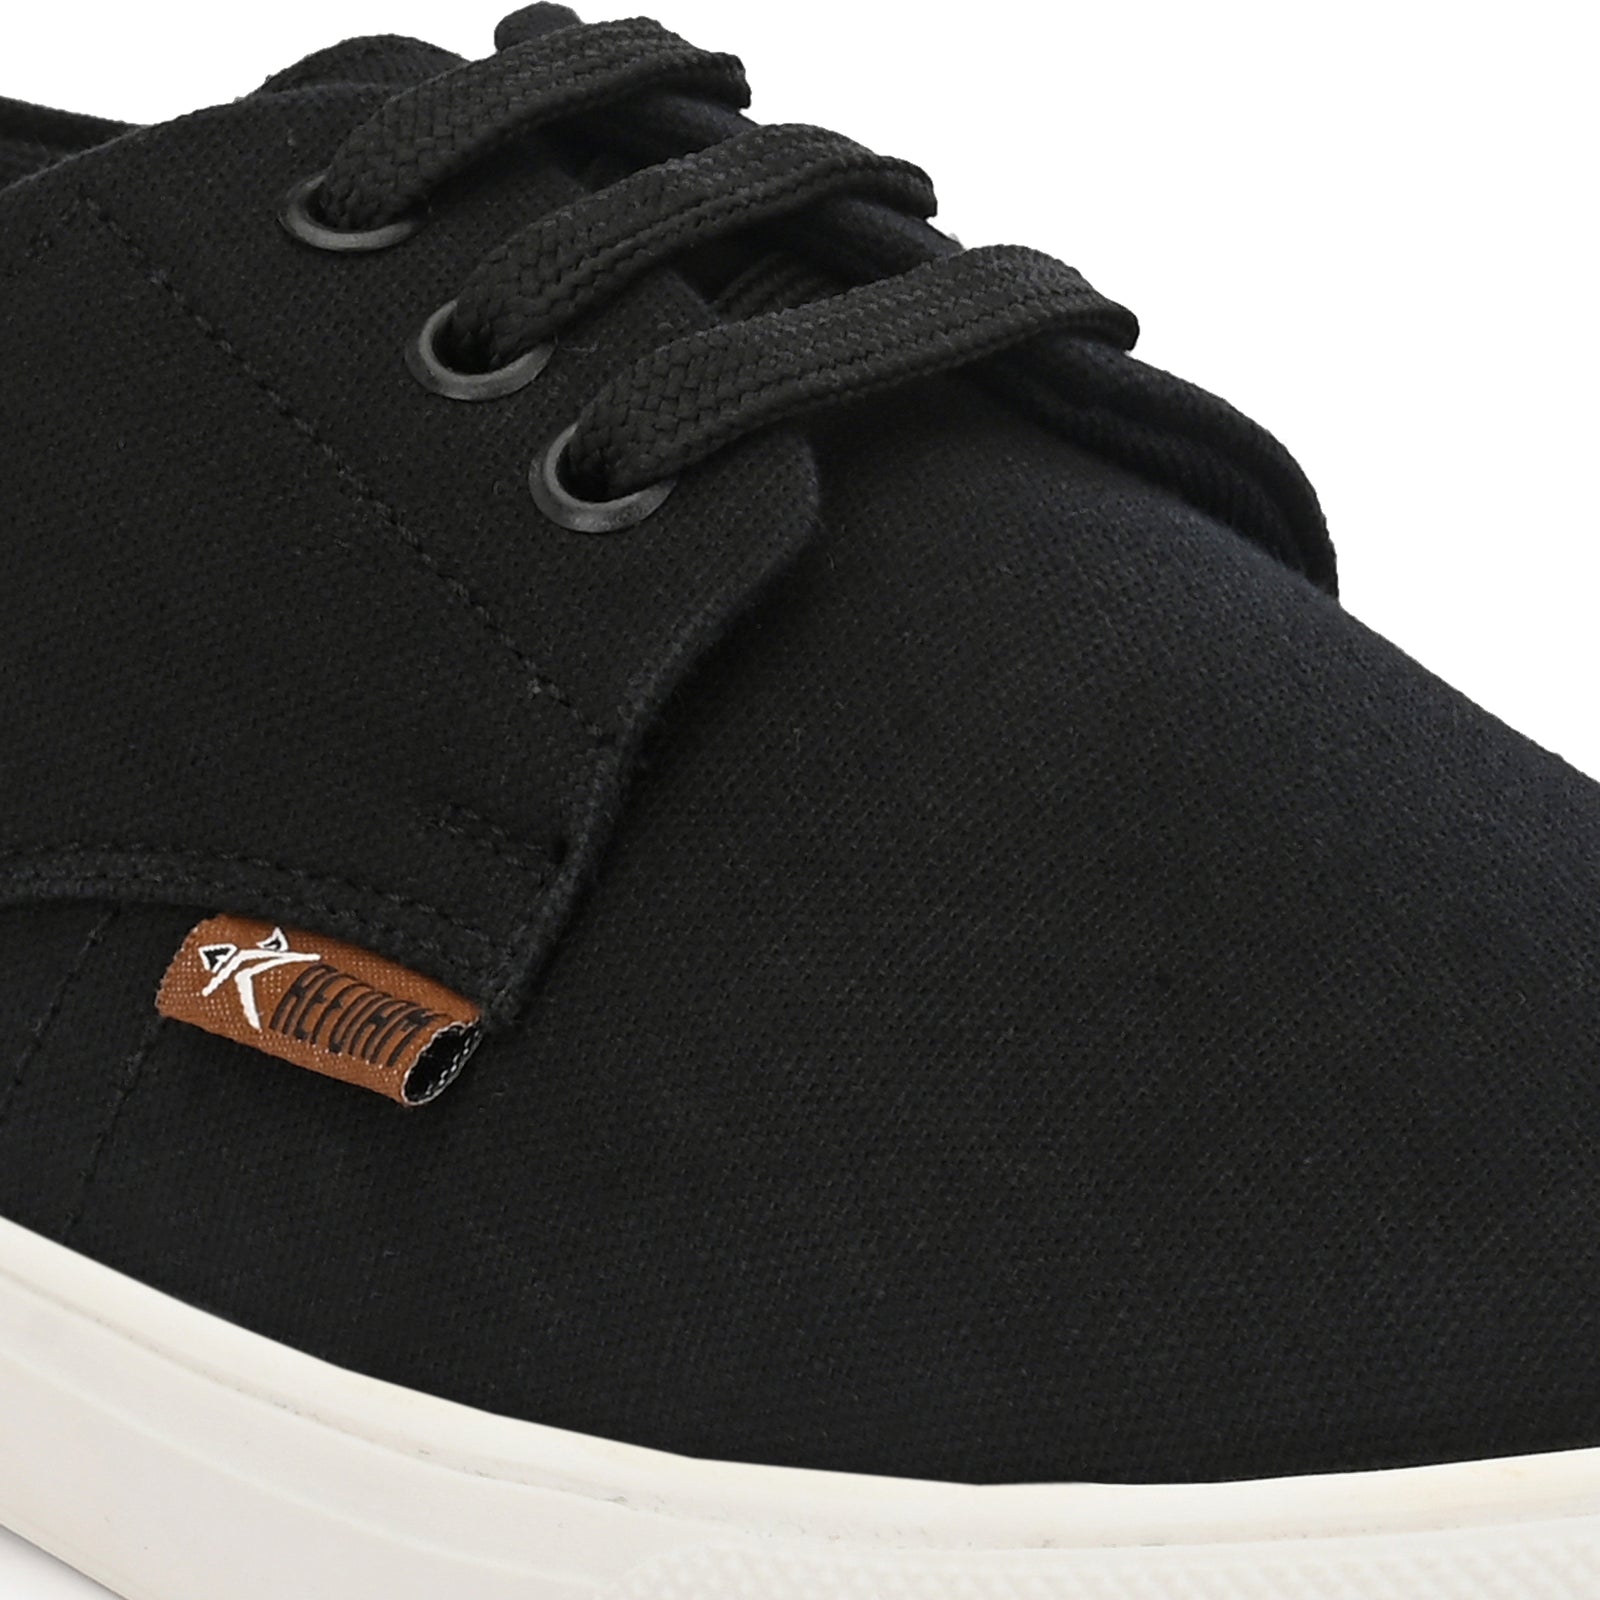 Black Solid Fabric Lace Up Lifestyle Casual Shoes For Men